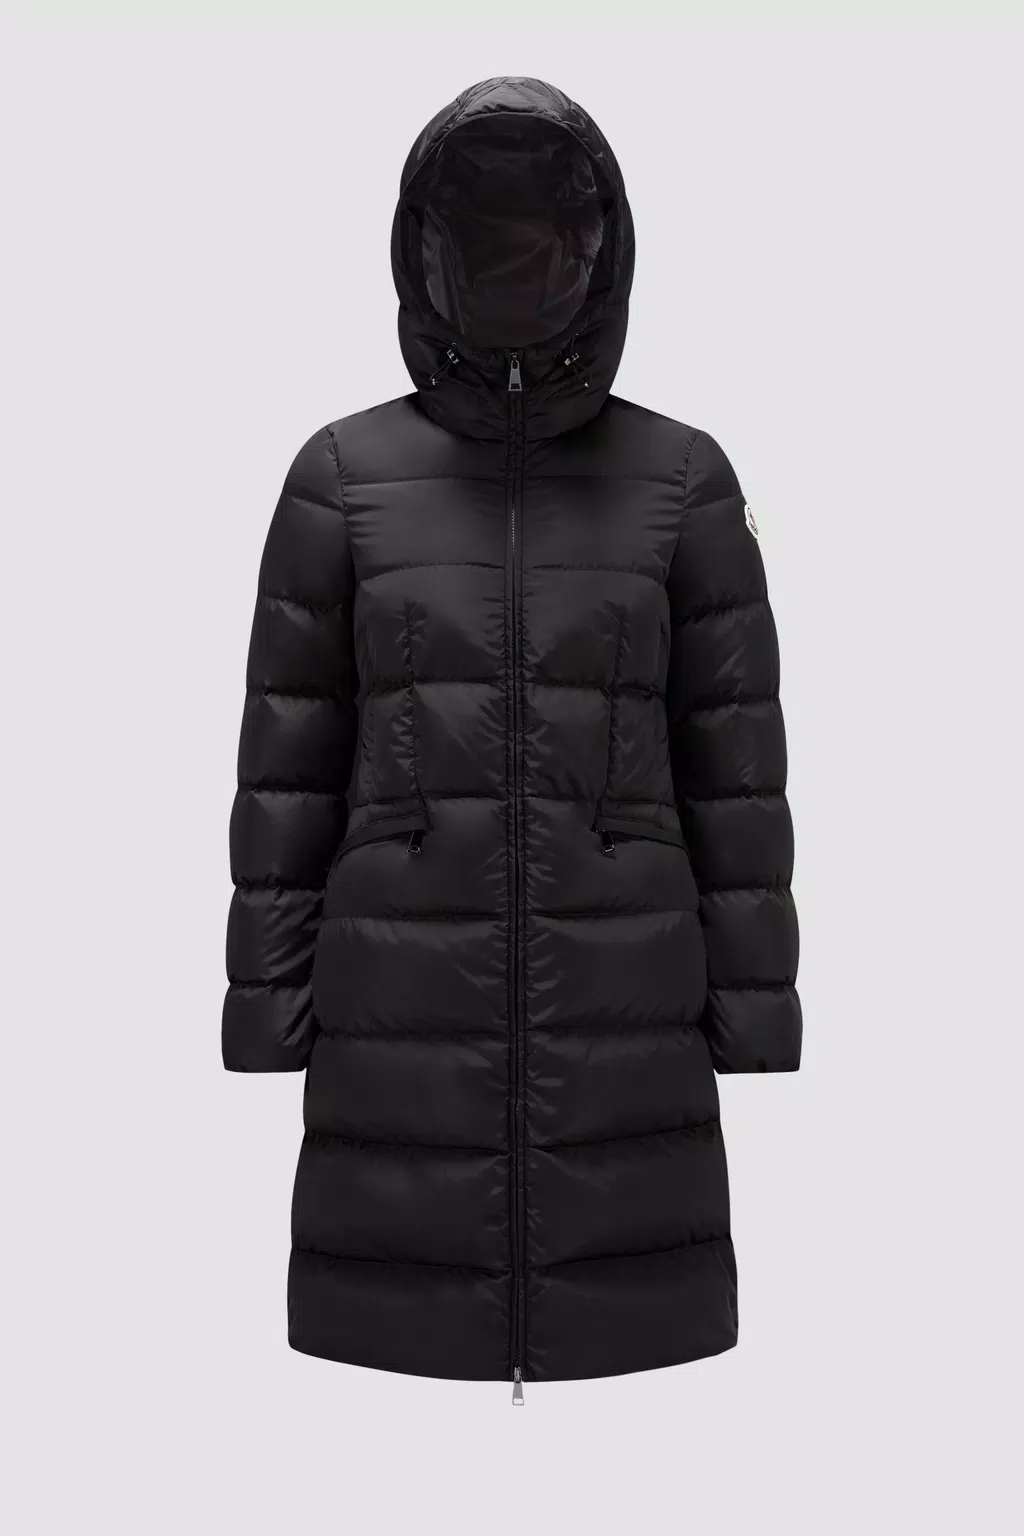 Outerwear - Jackets and Down Jackets for Women | Moncler GR